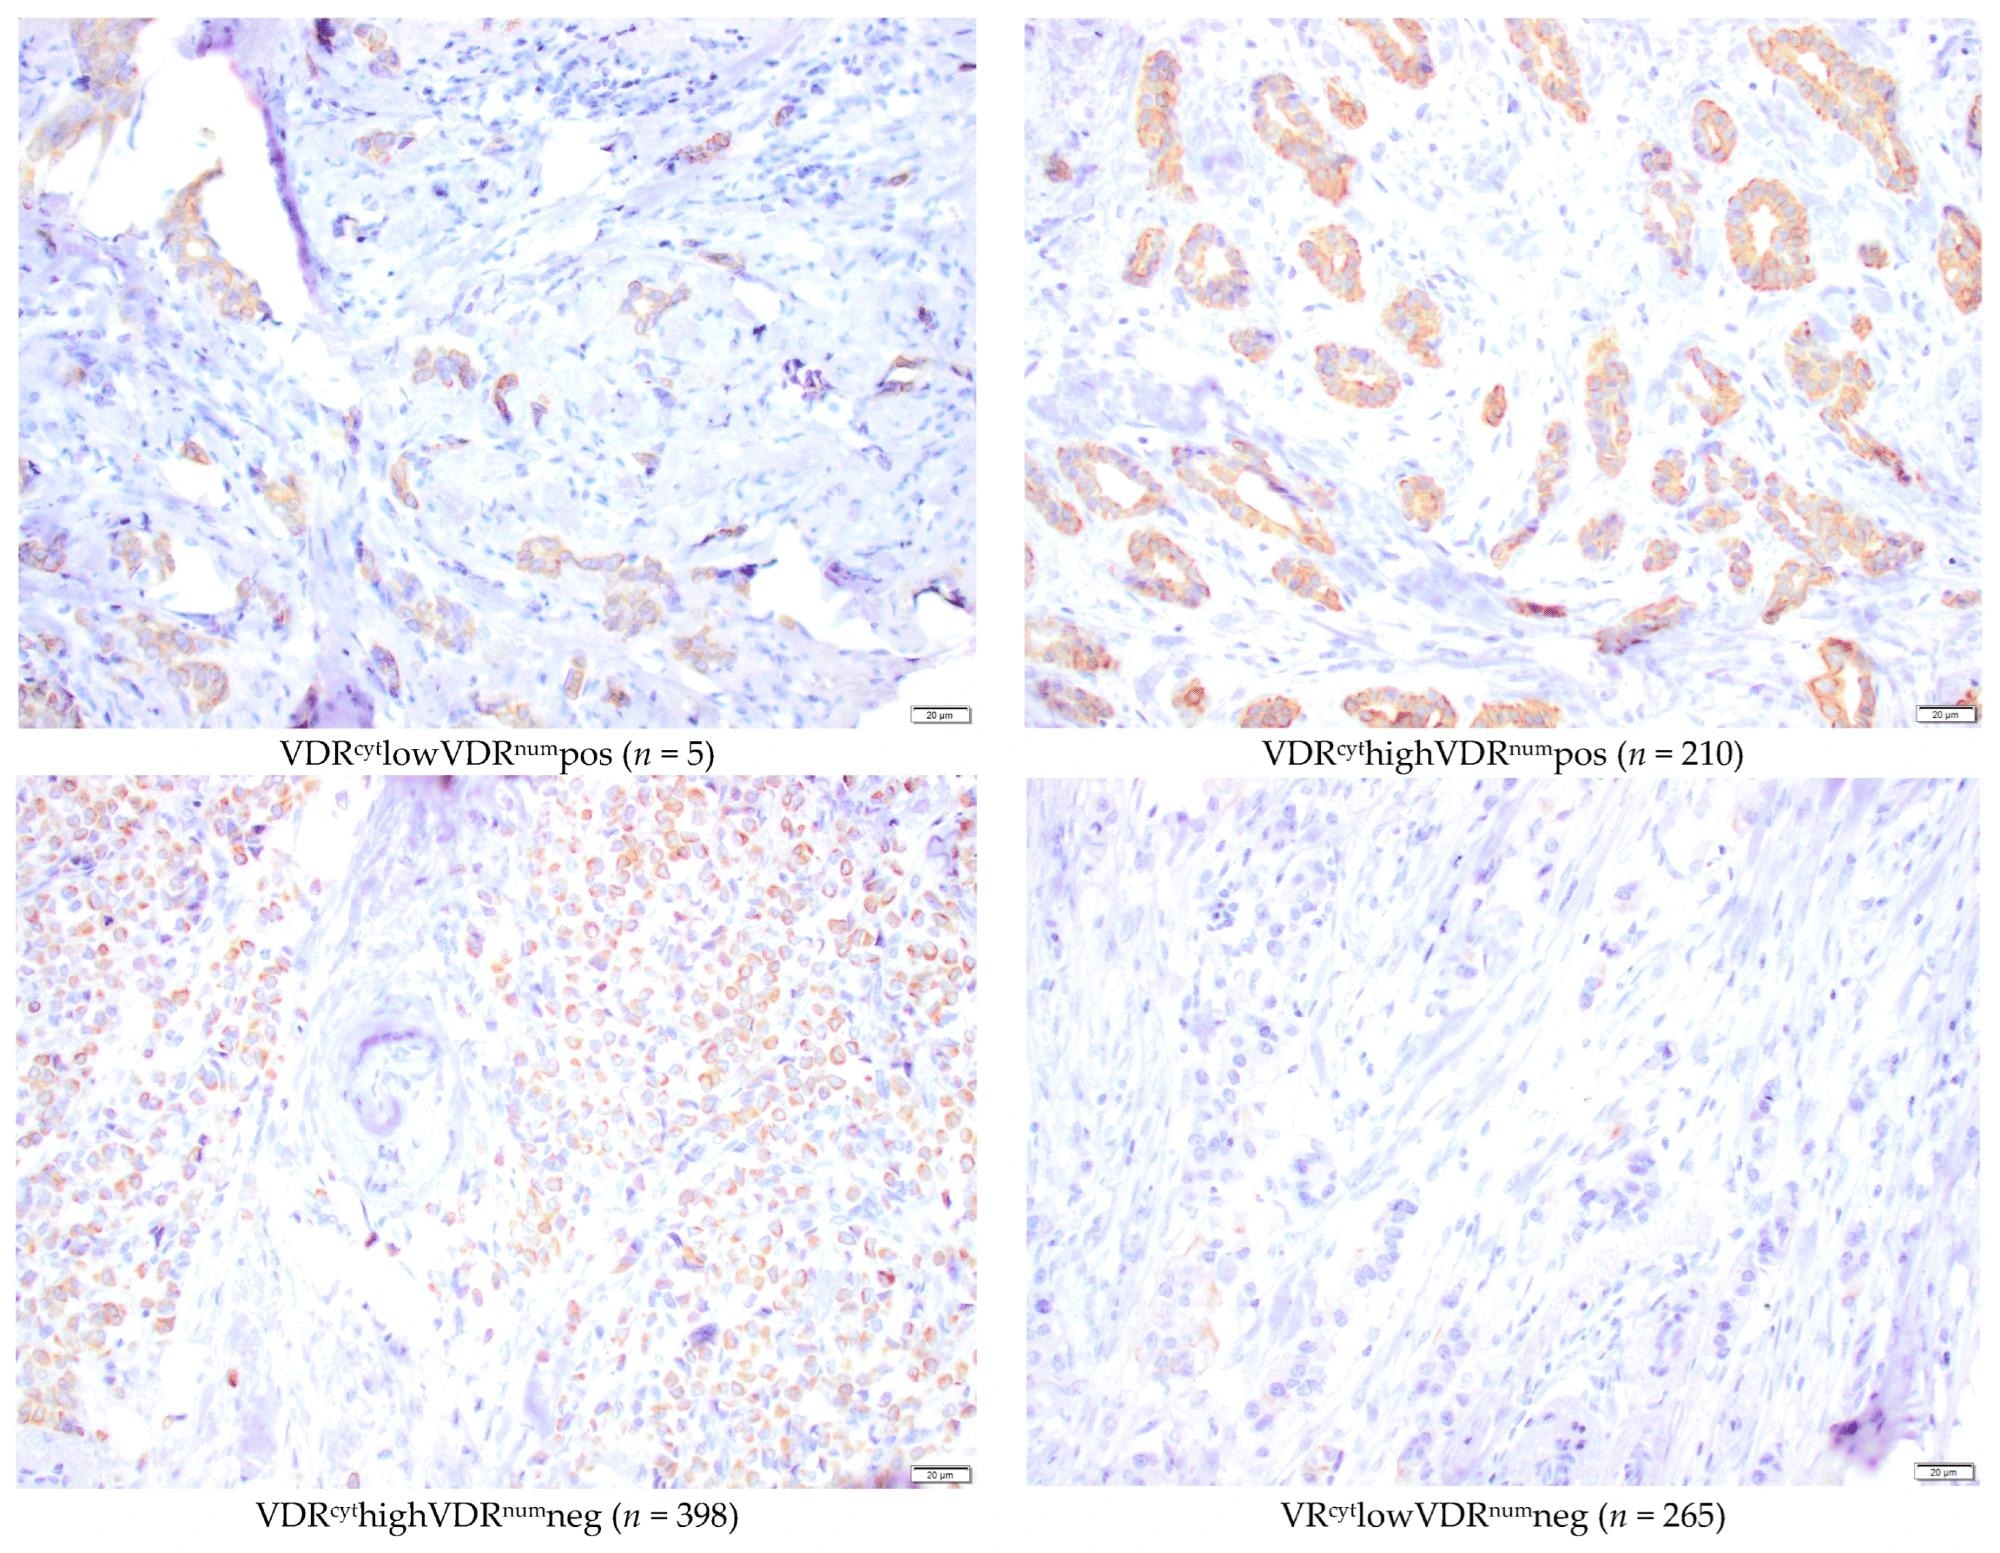 Microscopic representative images of immunohistochemical staining intensities of nuclear membrane and cytoplasmic VDR (40×) in the TMA. Bar represents 20 µm.